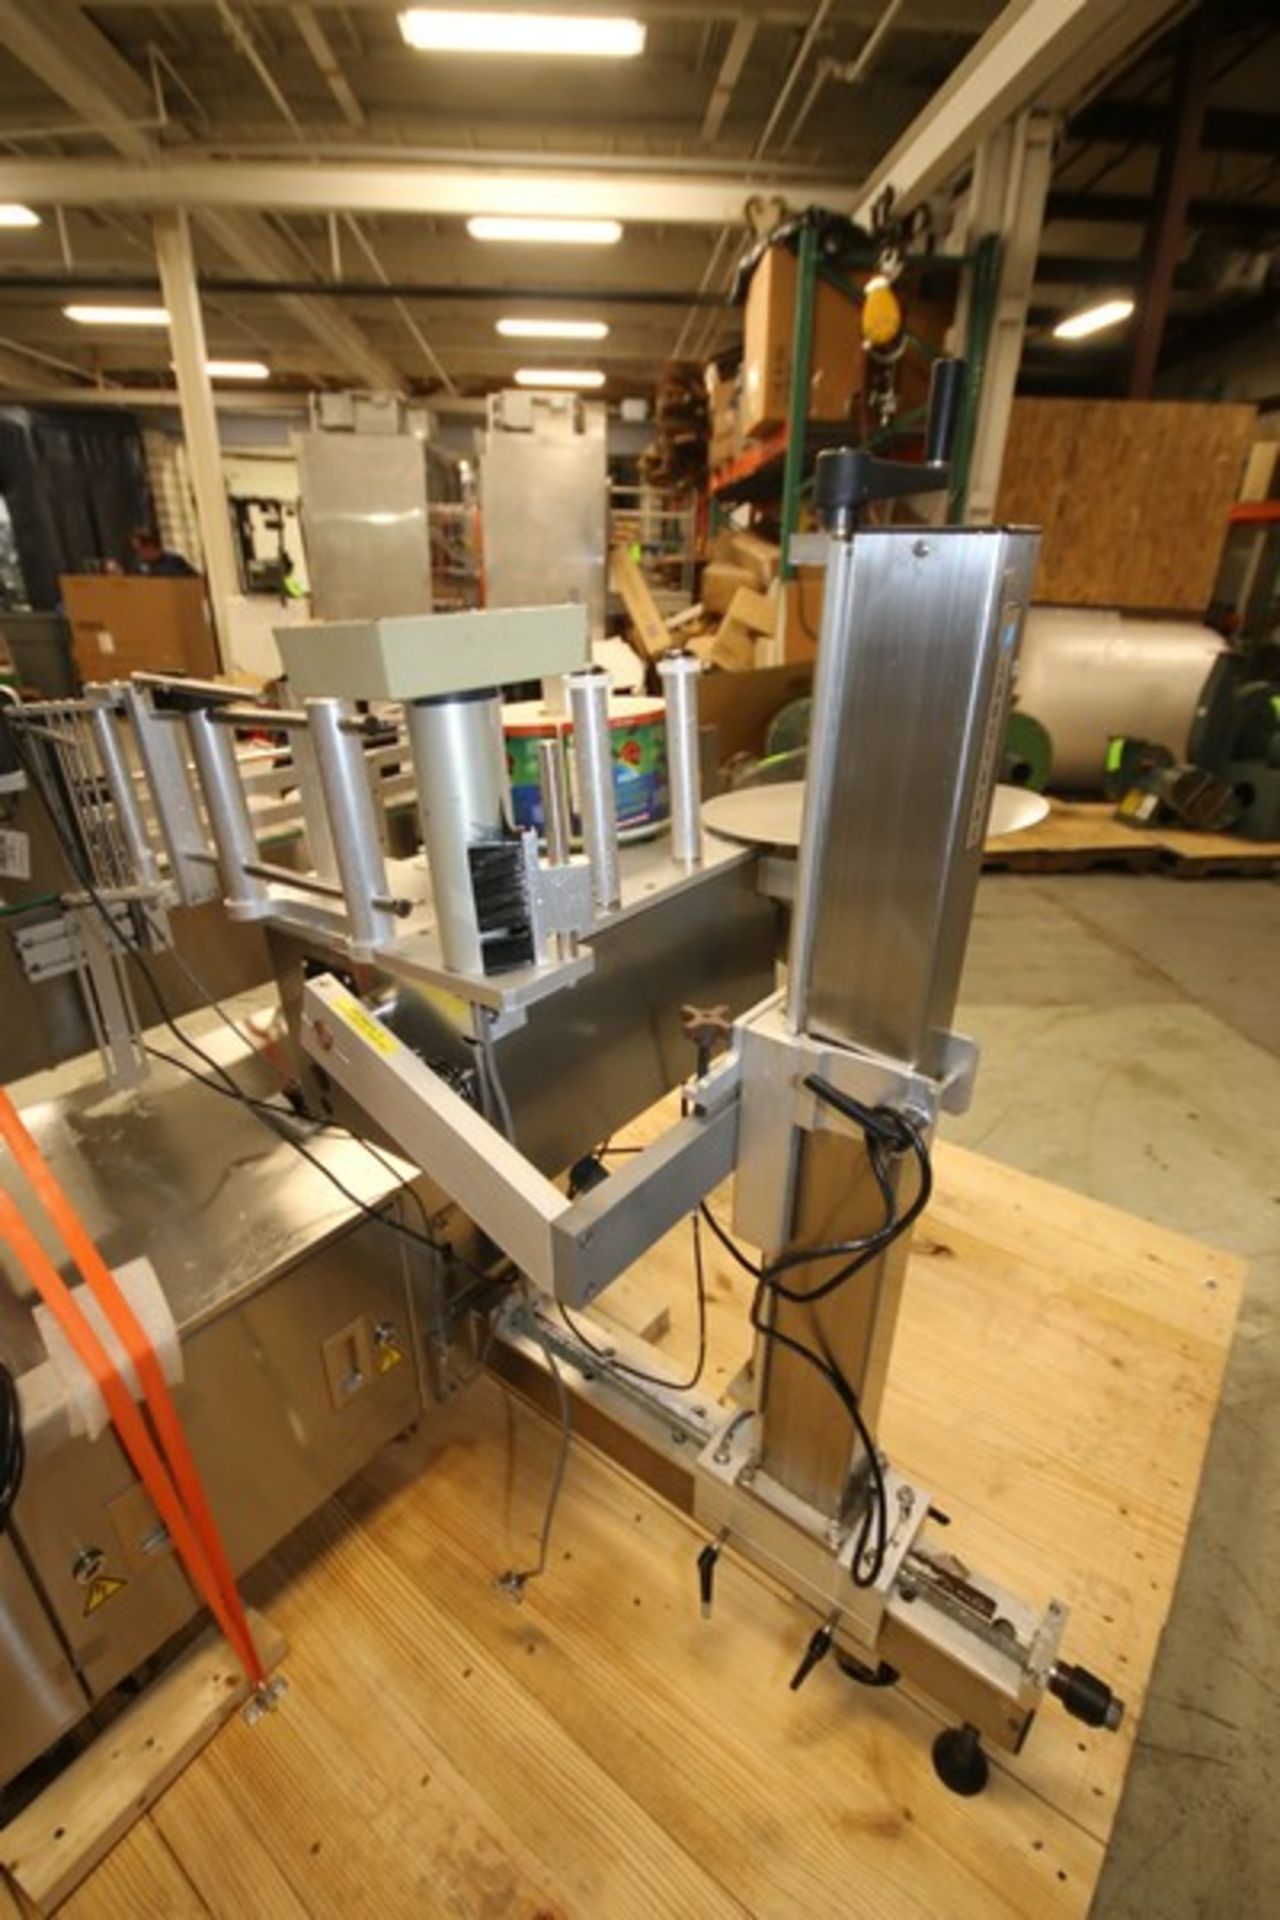 Labeler-Aire Inline S/S Labeling System, Model 5100 6" x 8' 3115NV 7" RH, SN 0335621111, with 6" W x - Image 9 of 14